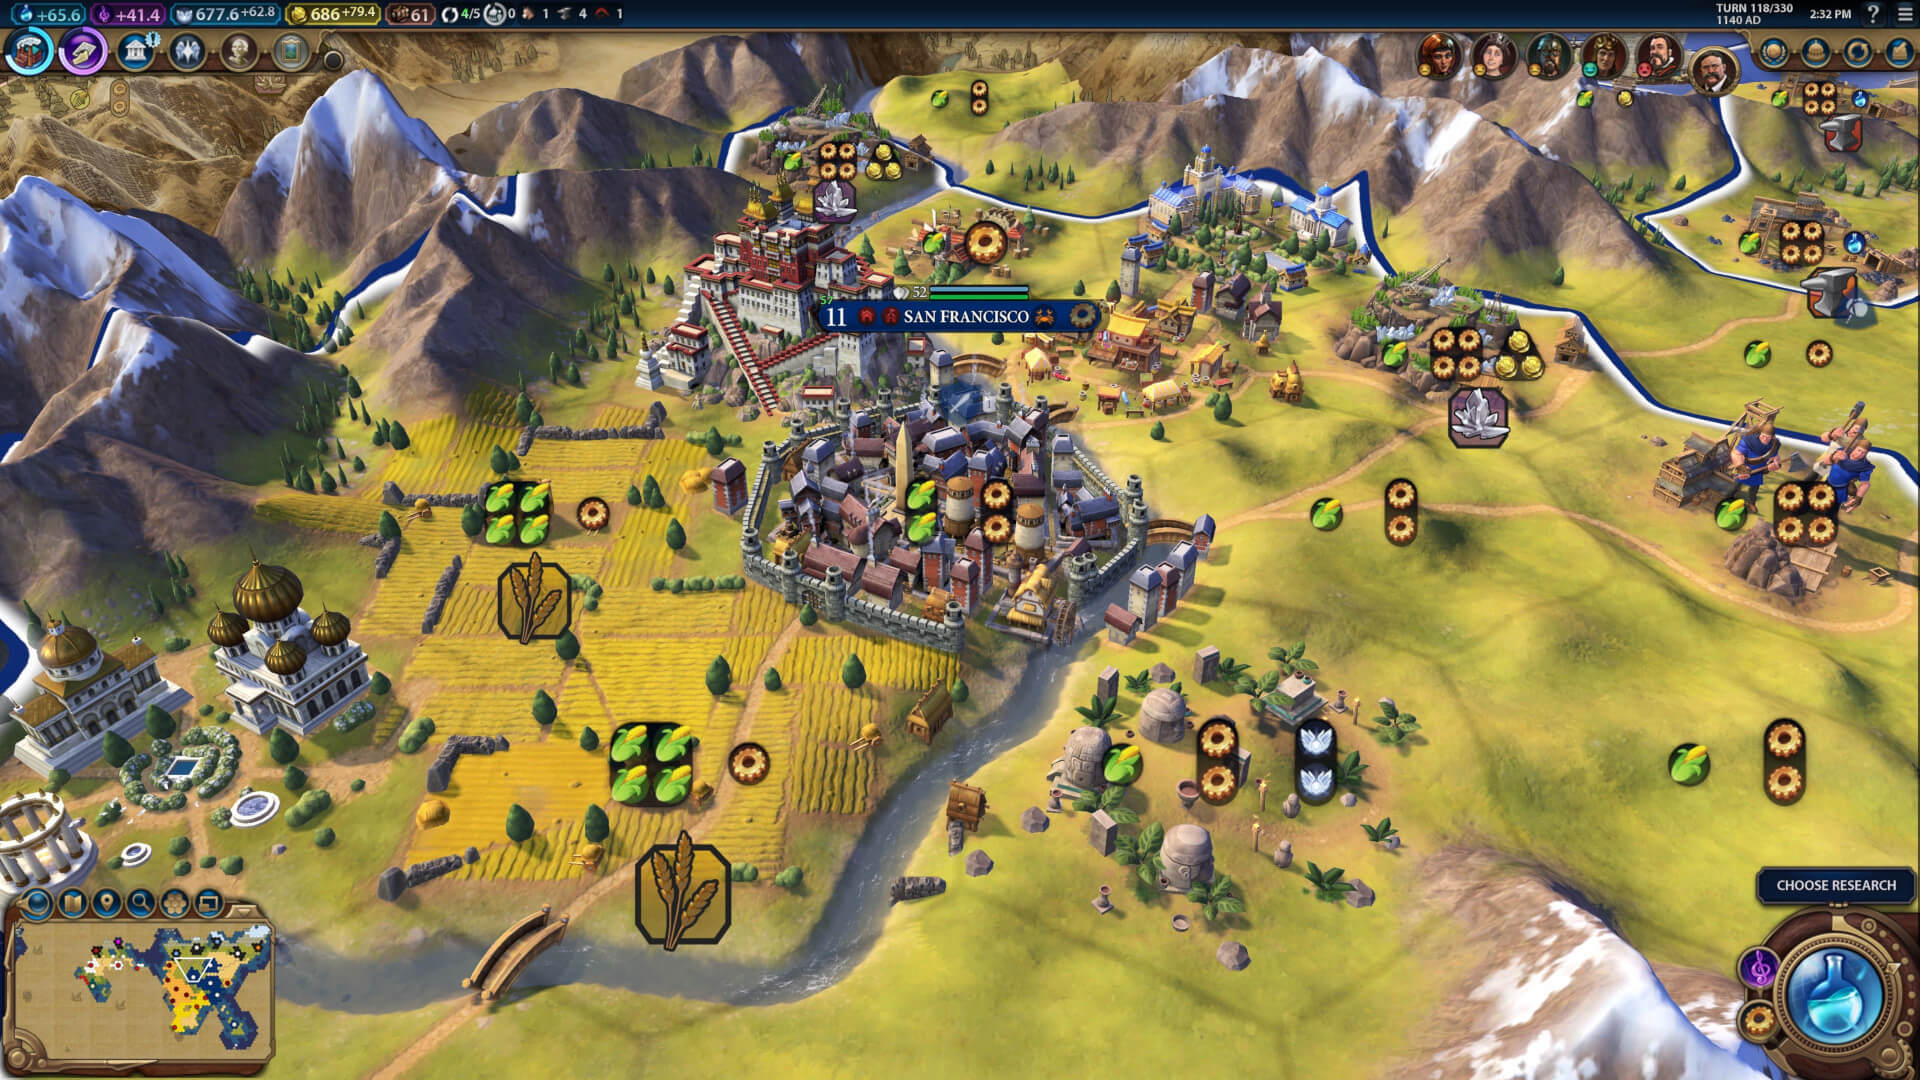 A view of the city of San Francisco in Civilization VI